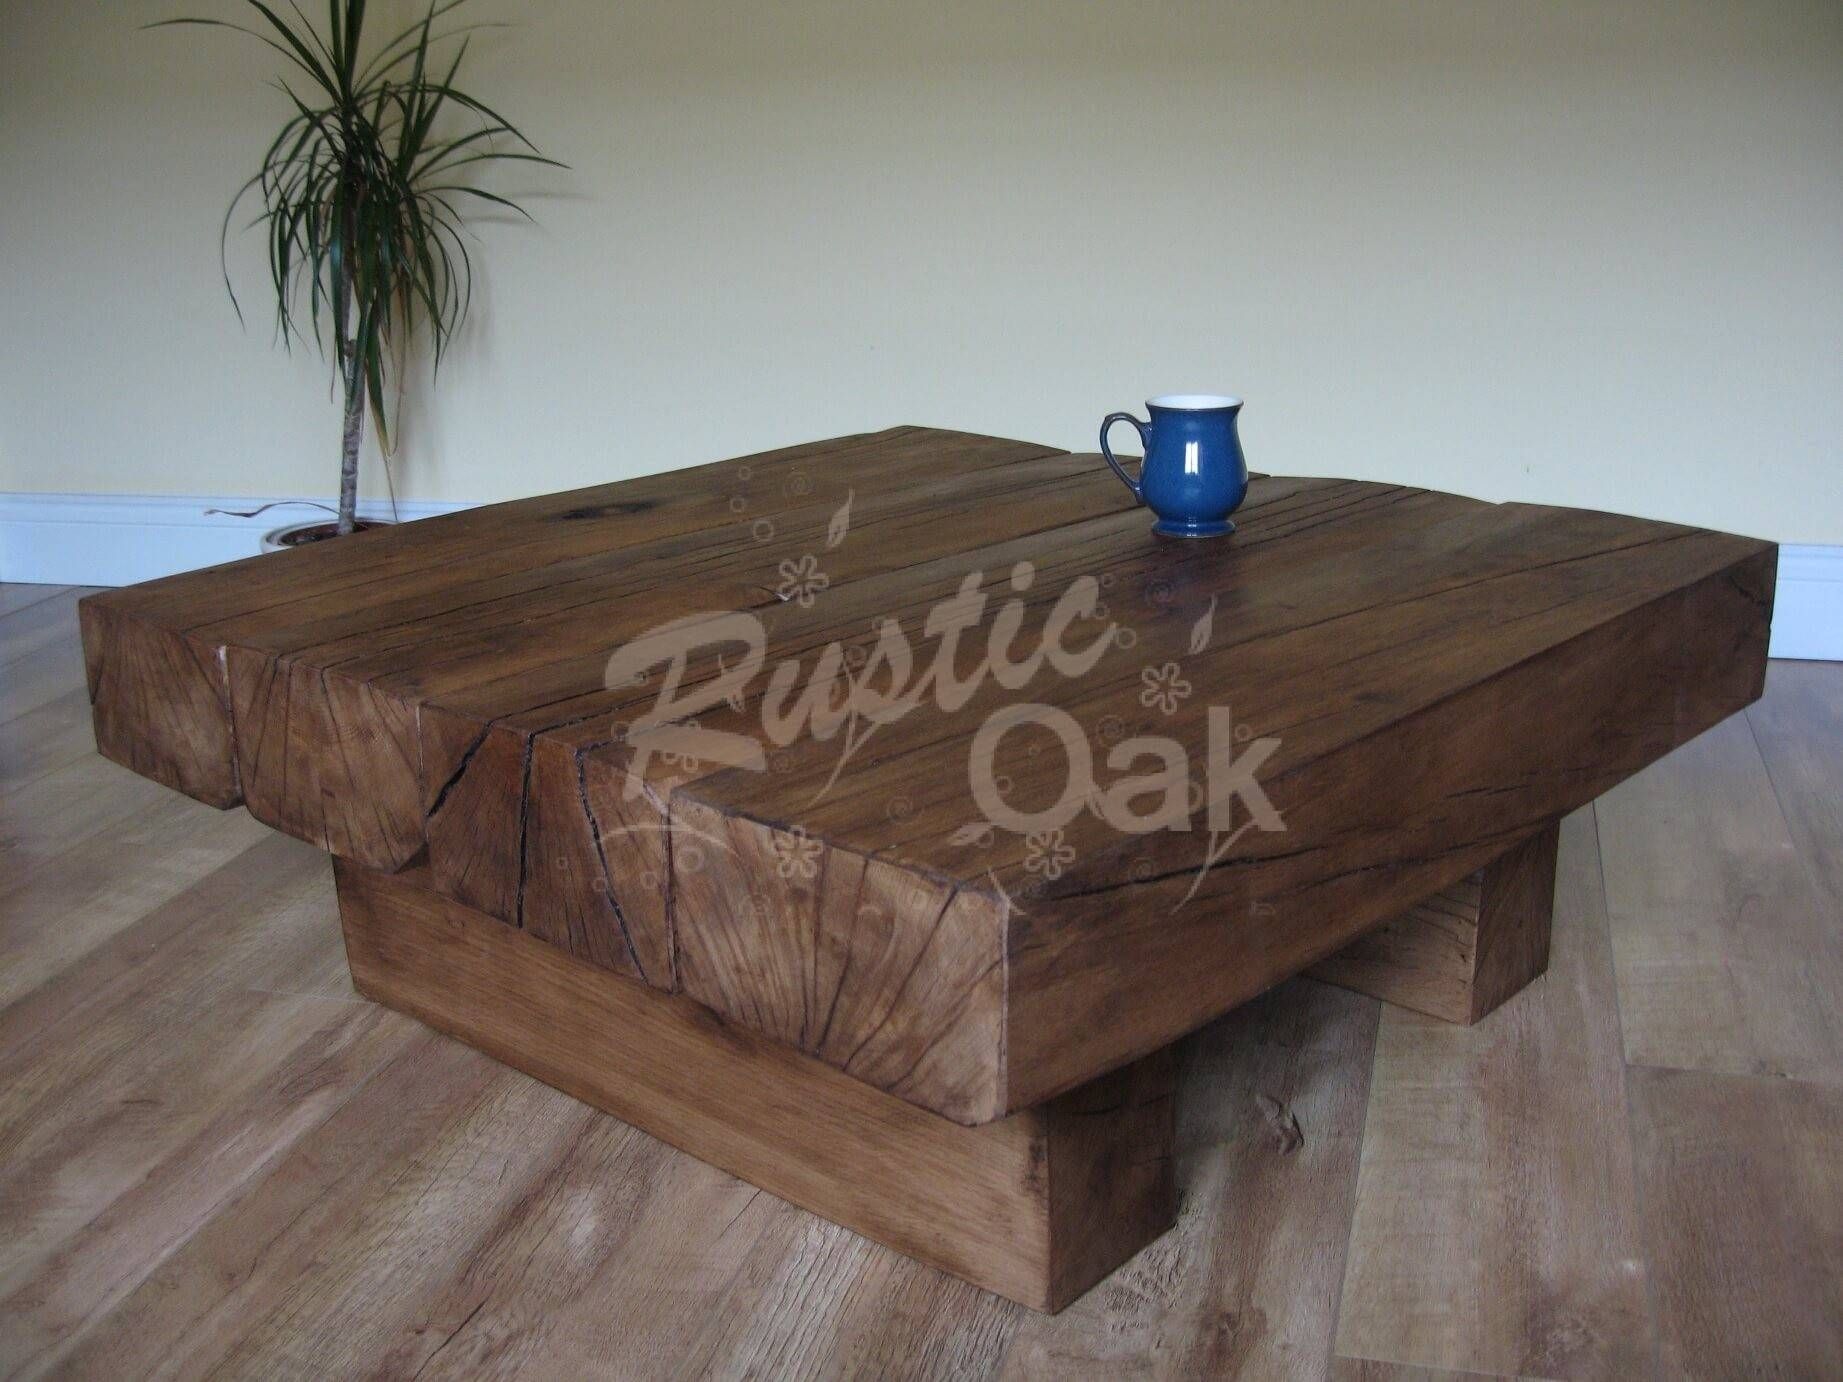 4 Beam Square Coffee Table – Rustic Oak For Rustic Oak Coffee Tables (View 3 of 15)